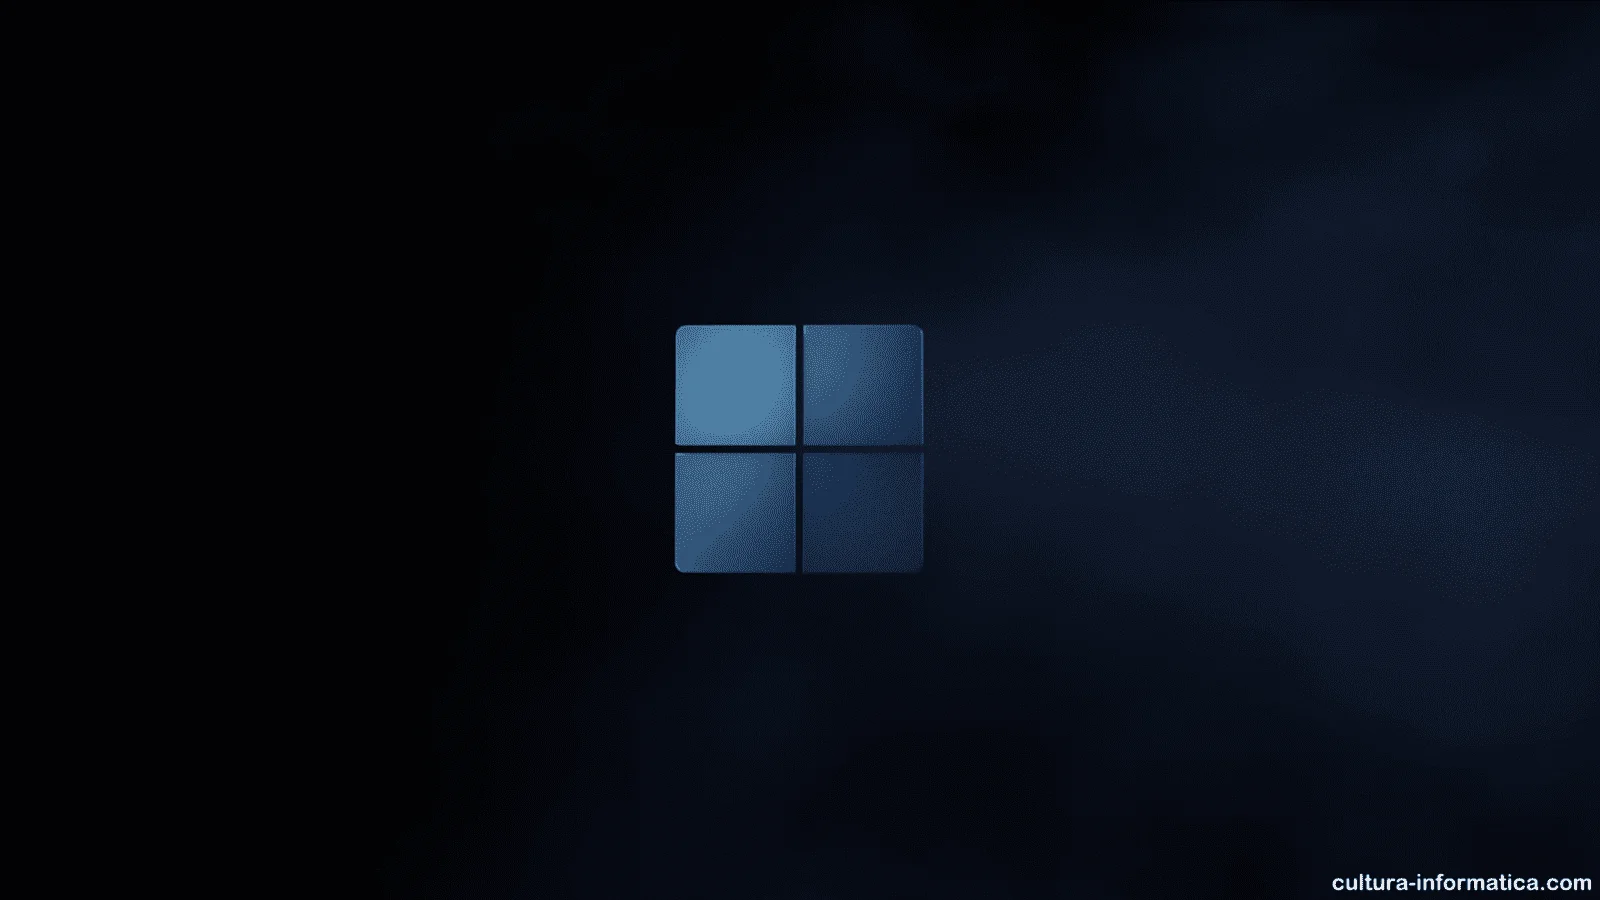 Rumor: Windows 11 will have built-in ads